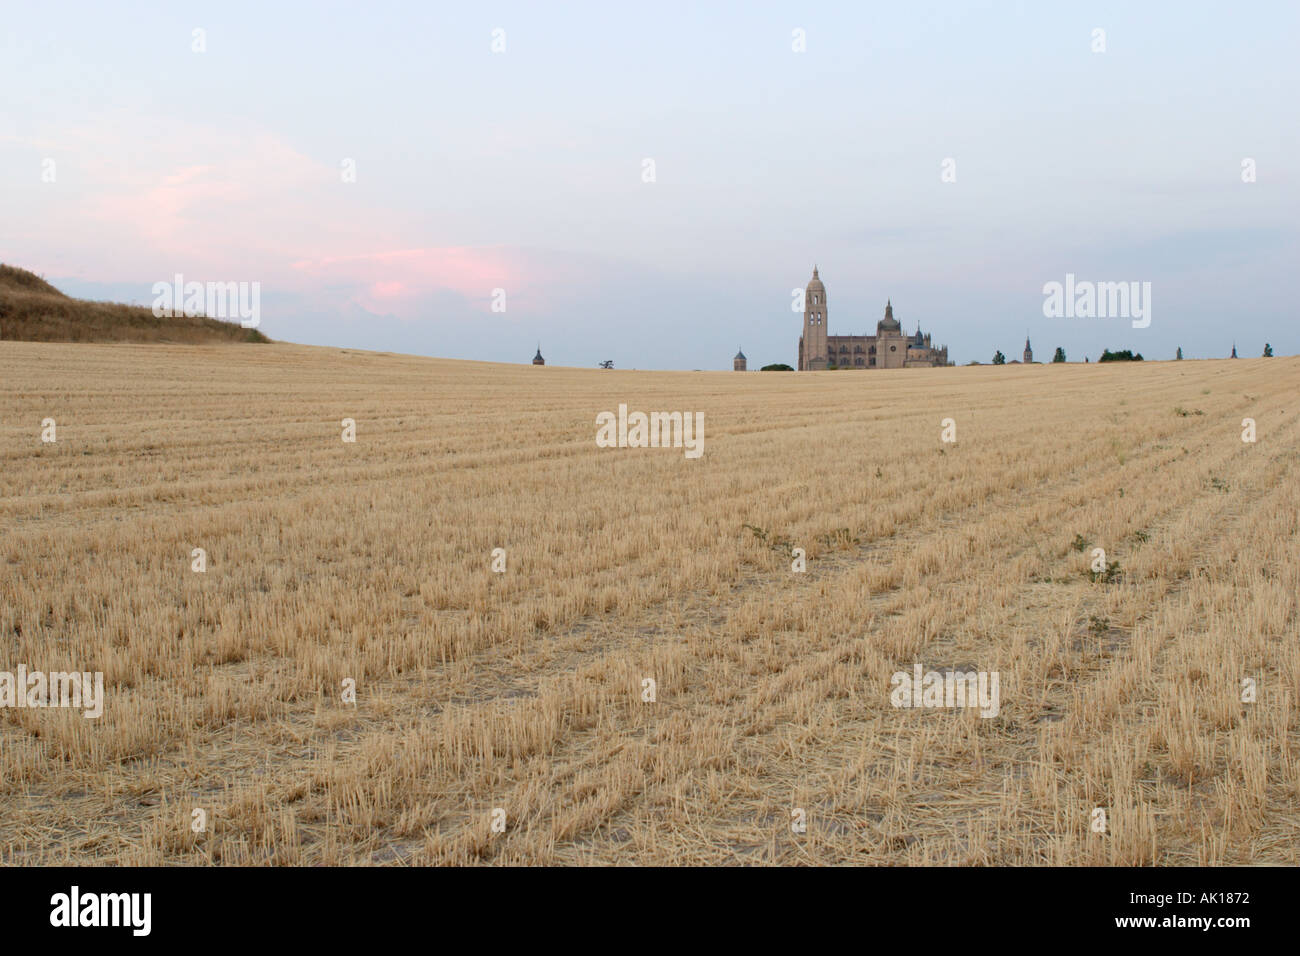 Landscape at sunset with Segovia Cathedral in the distance, Castilla y Leon, Spain Stock Photo